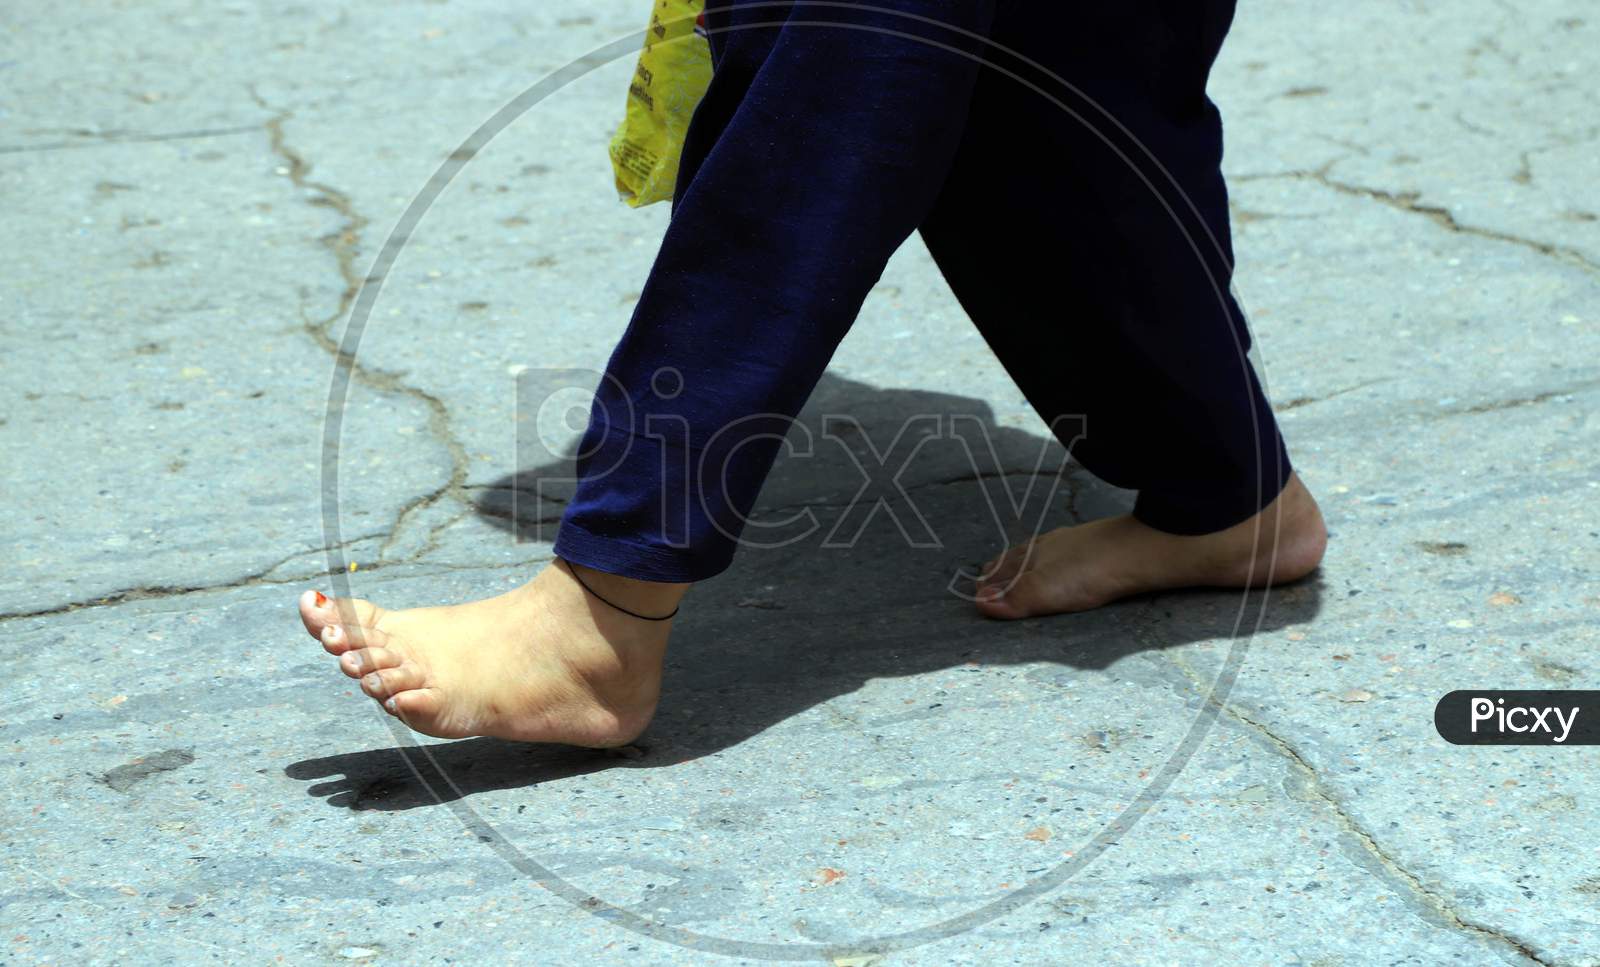 A Migrant worker walks Naked Feet On A Hot Day During A Nationwide Lockdown In Wake Of Coronavirus In Prayagraj, May 27, 2020.